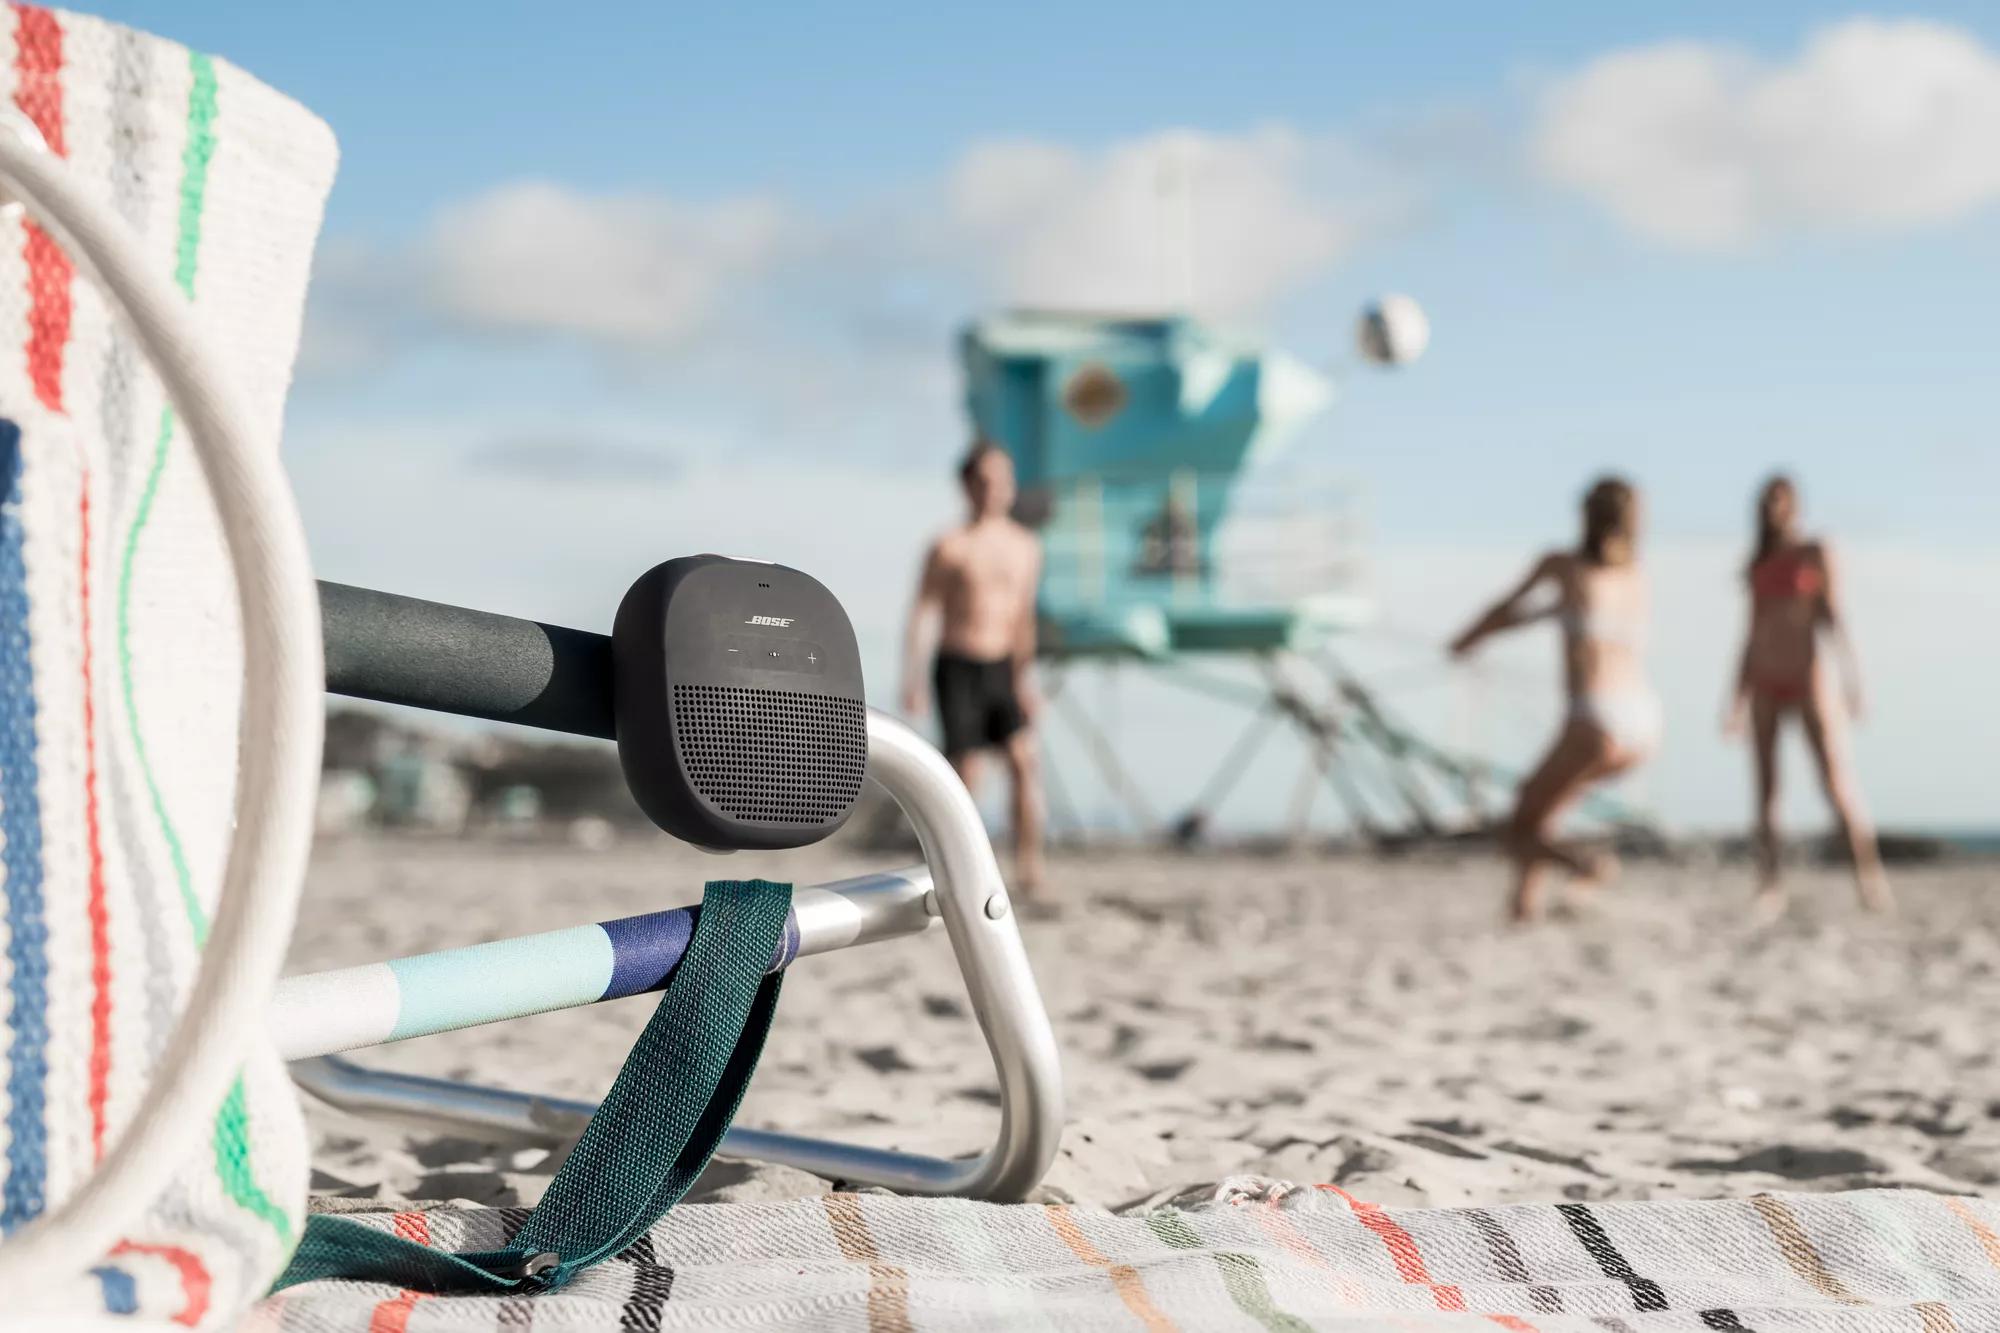 A SoundLink Micro Bluetooth speaker attached to a chair at the beach